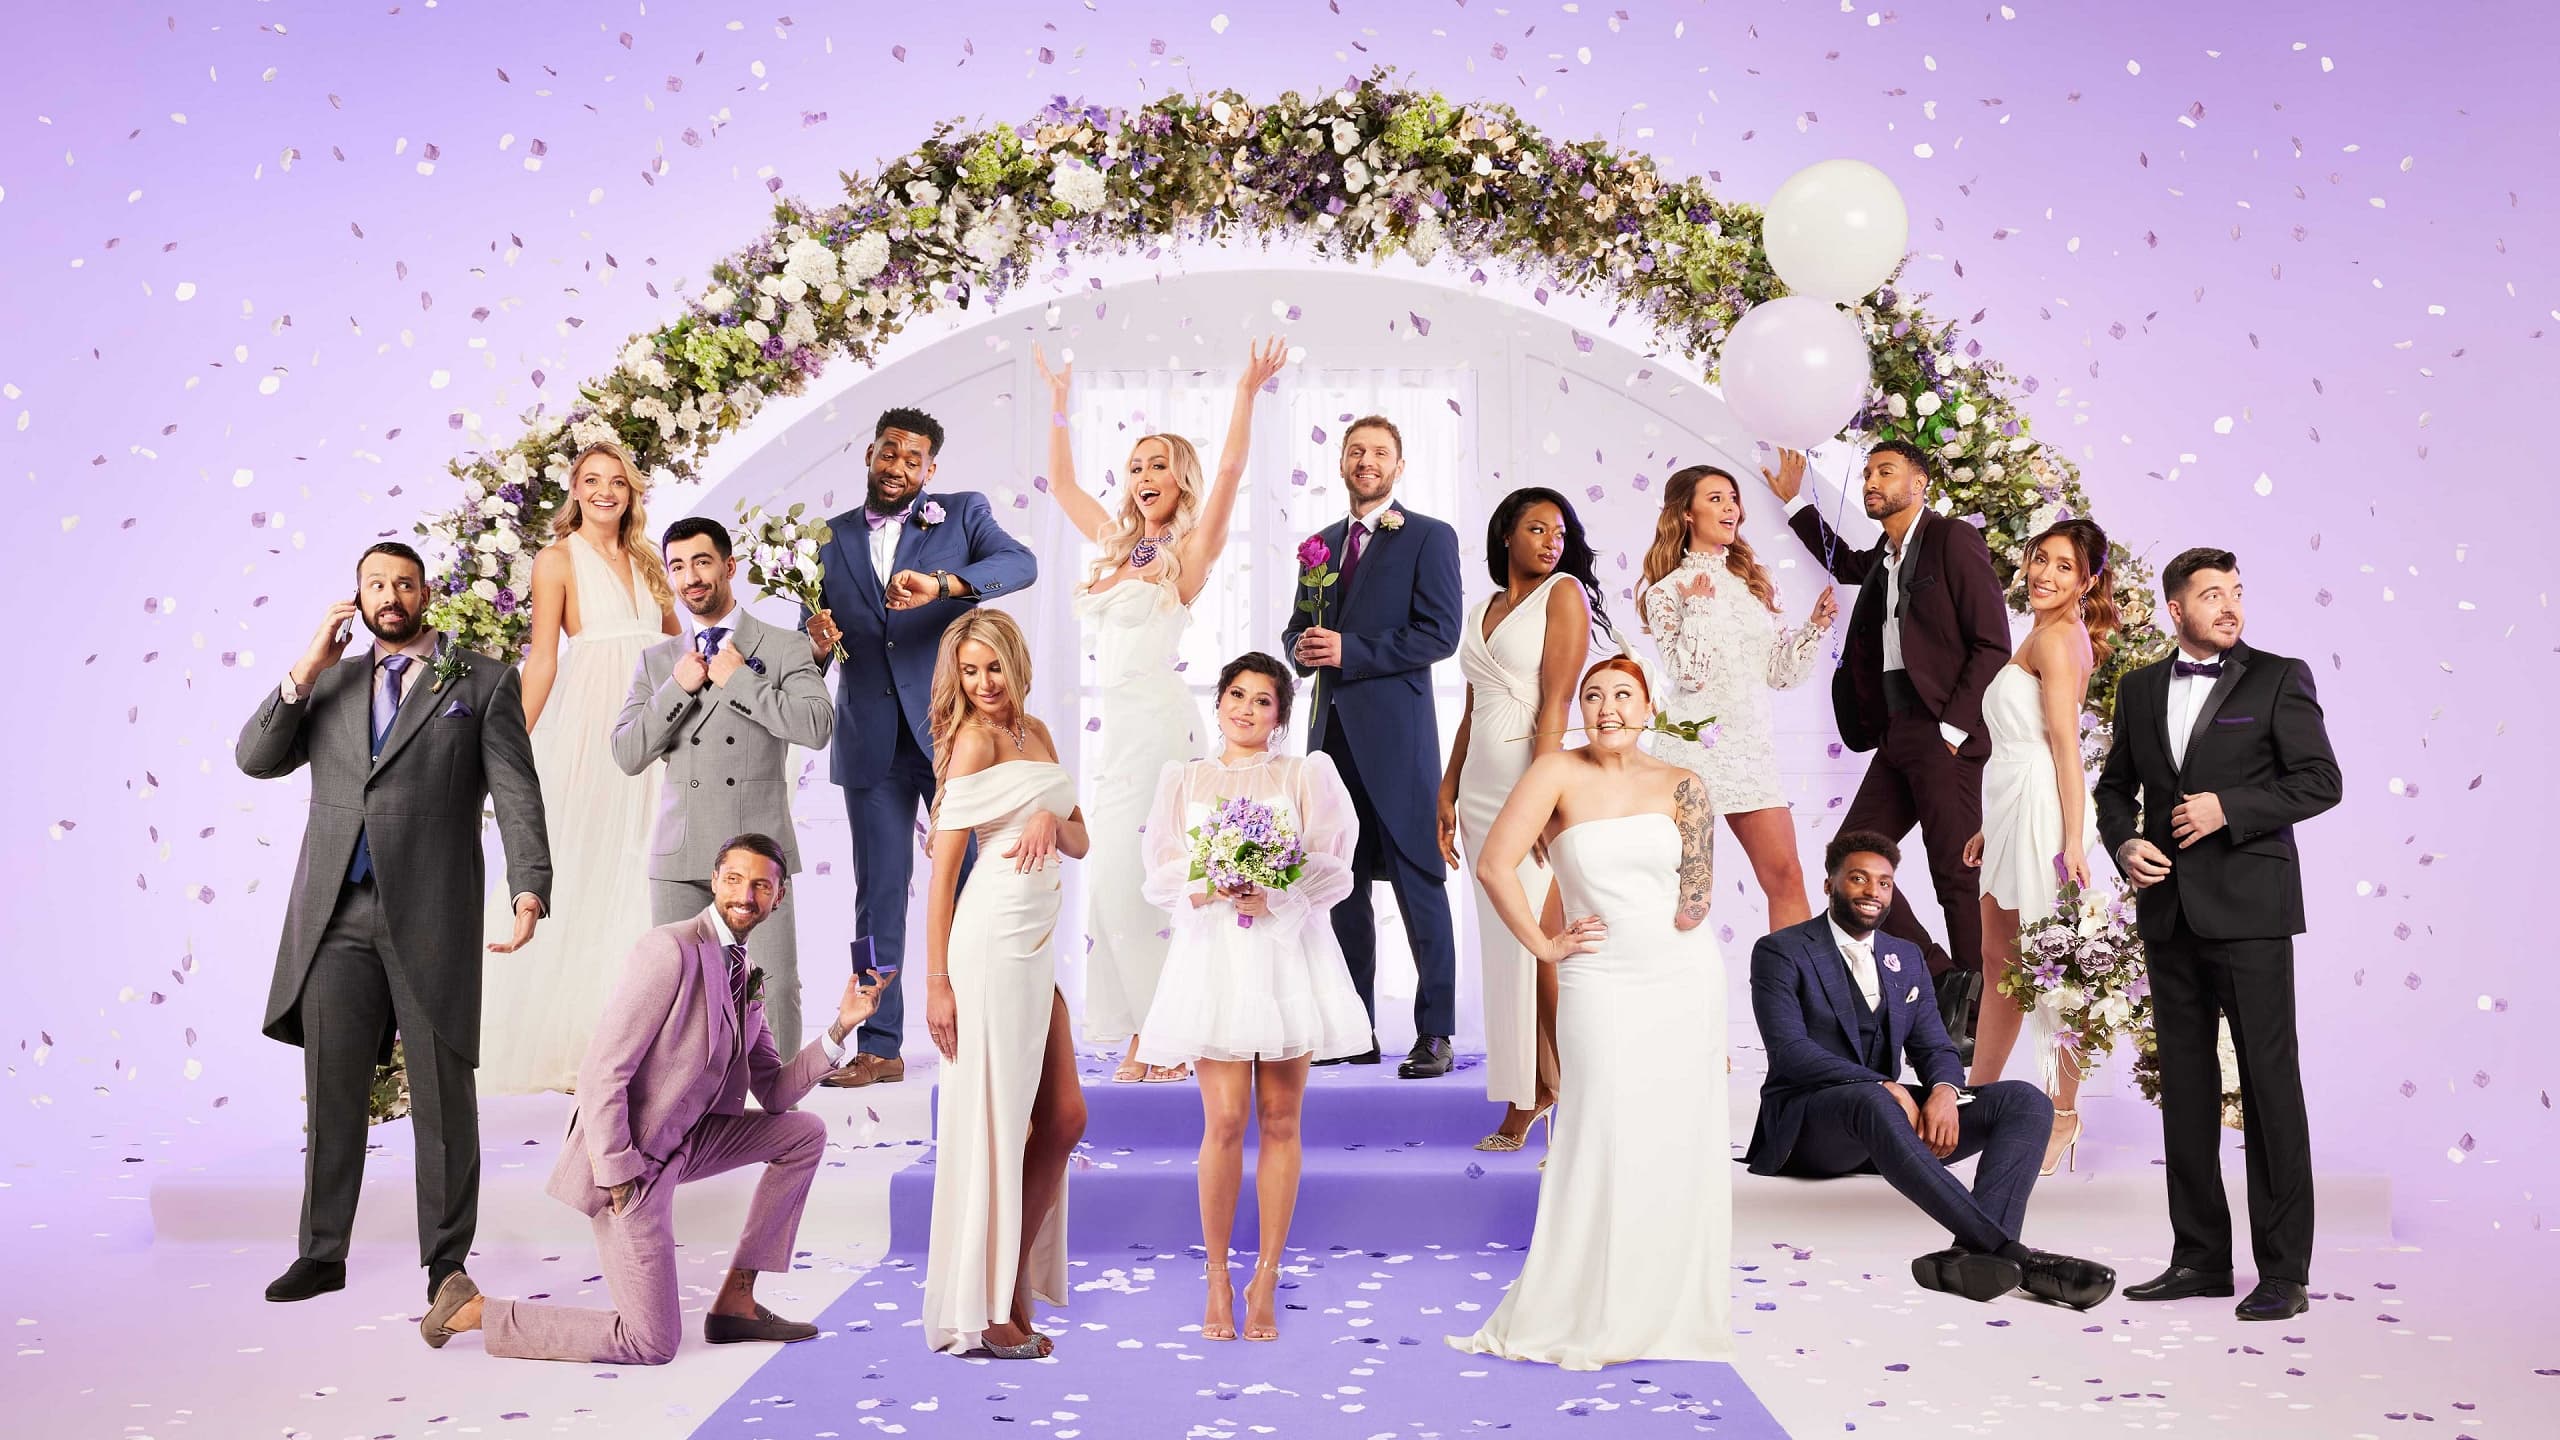 Married at First Sight UK - Season 8 Episode 18